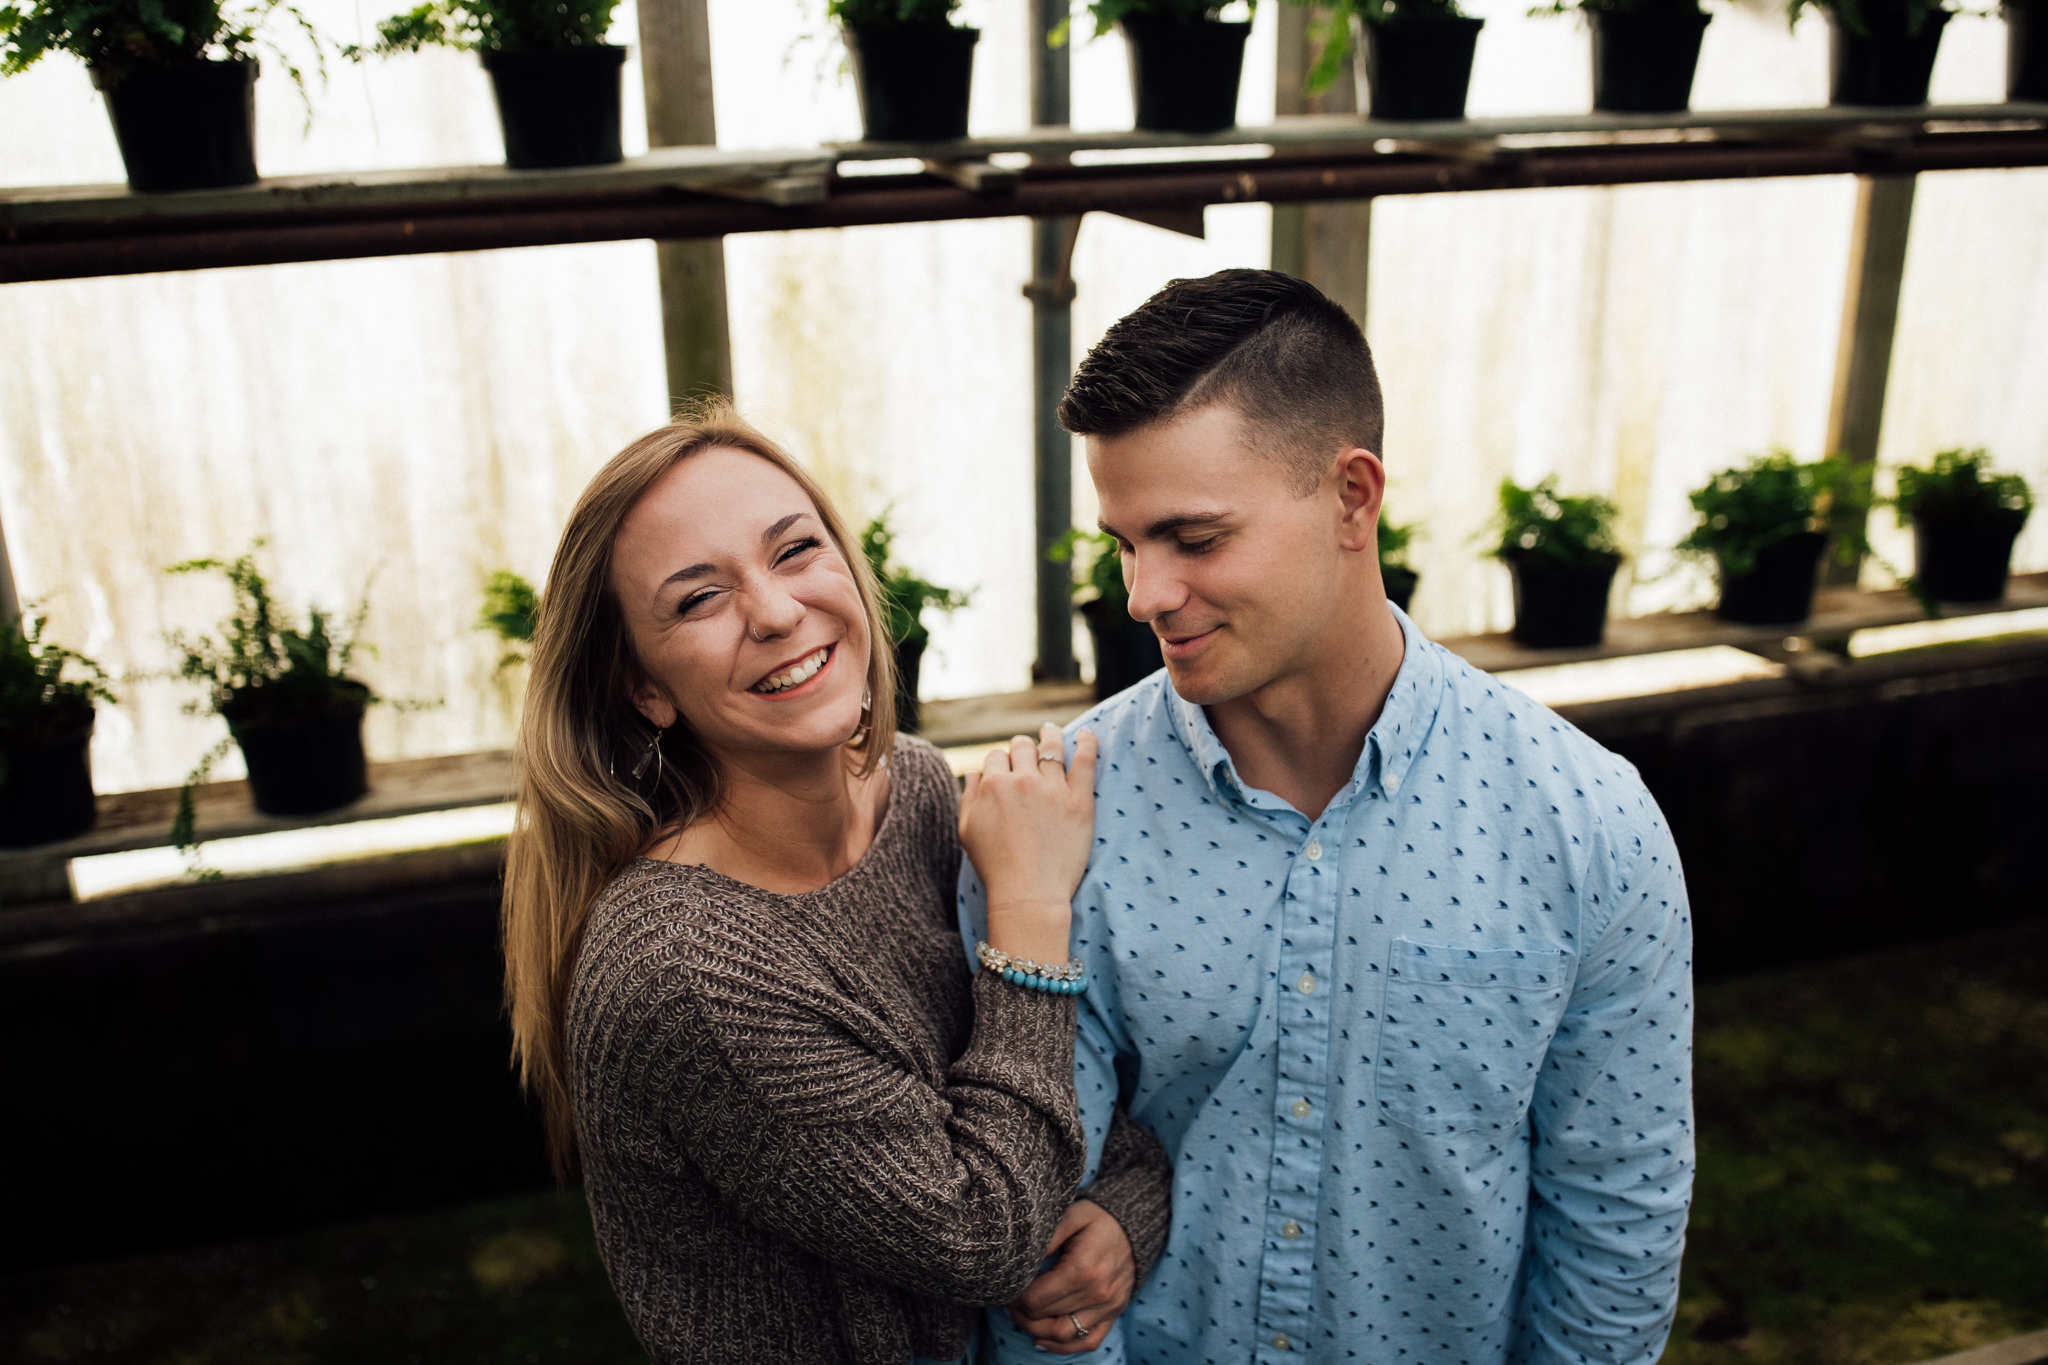 memphis-engagement-photographer-thewarmtharoundyou-greenhouse-engagement-pictures (27 of 118).jpg